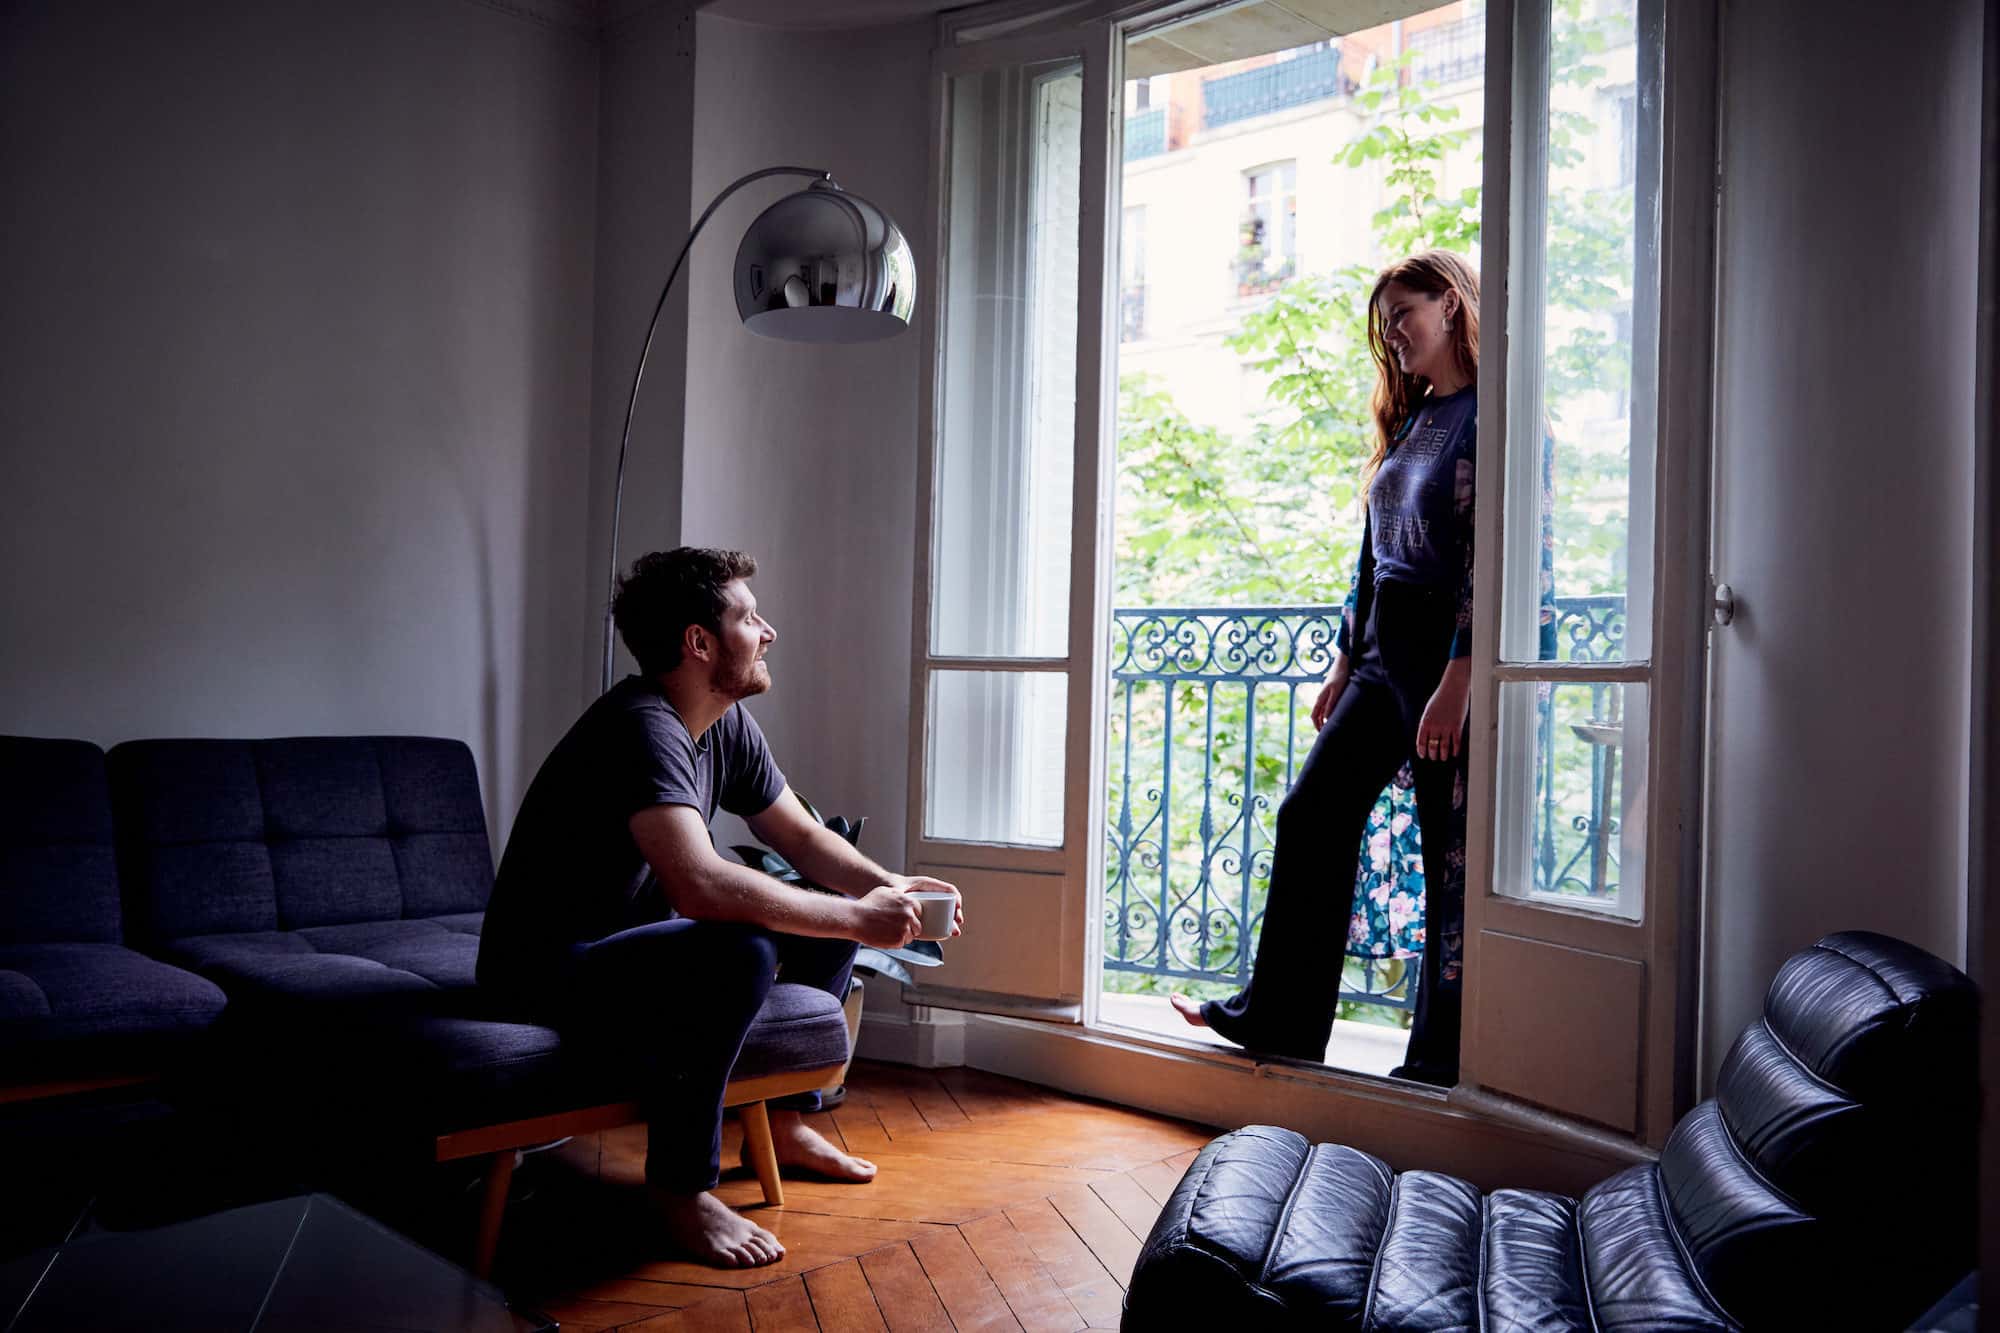 A young man and woman living in Paris and talking in their apartment which has wooden floors and a window that opens onto a balcony.